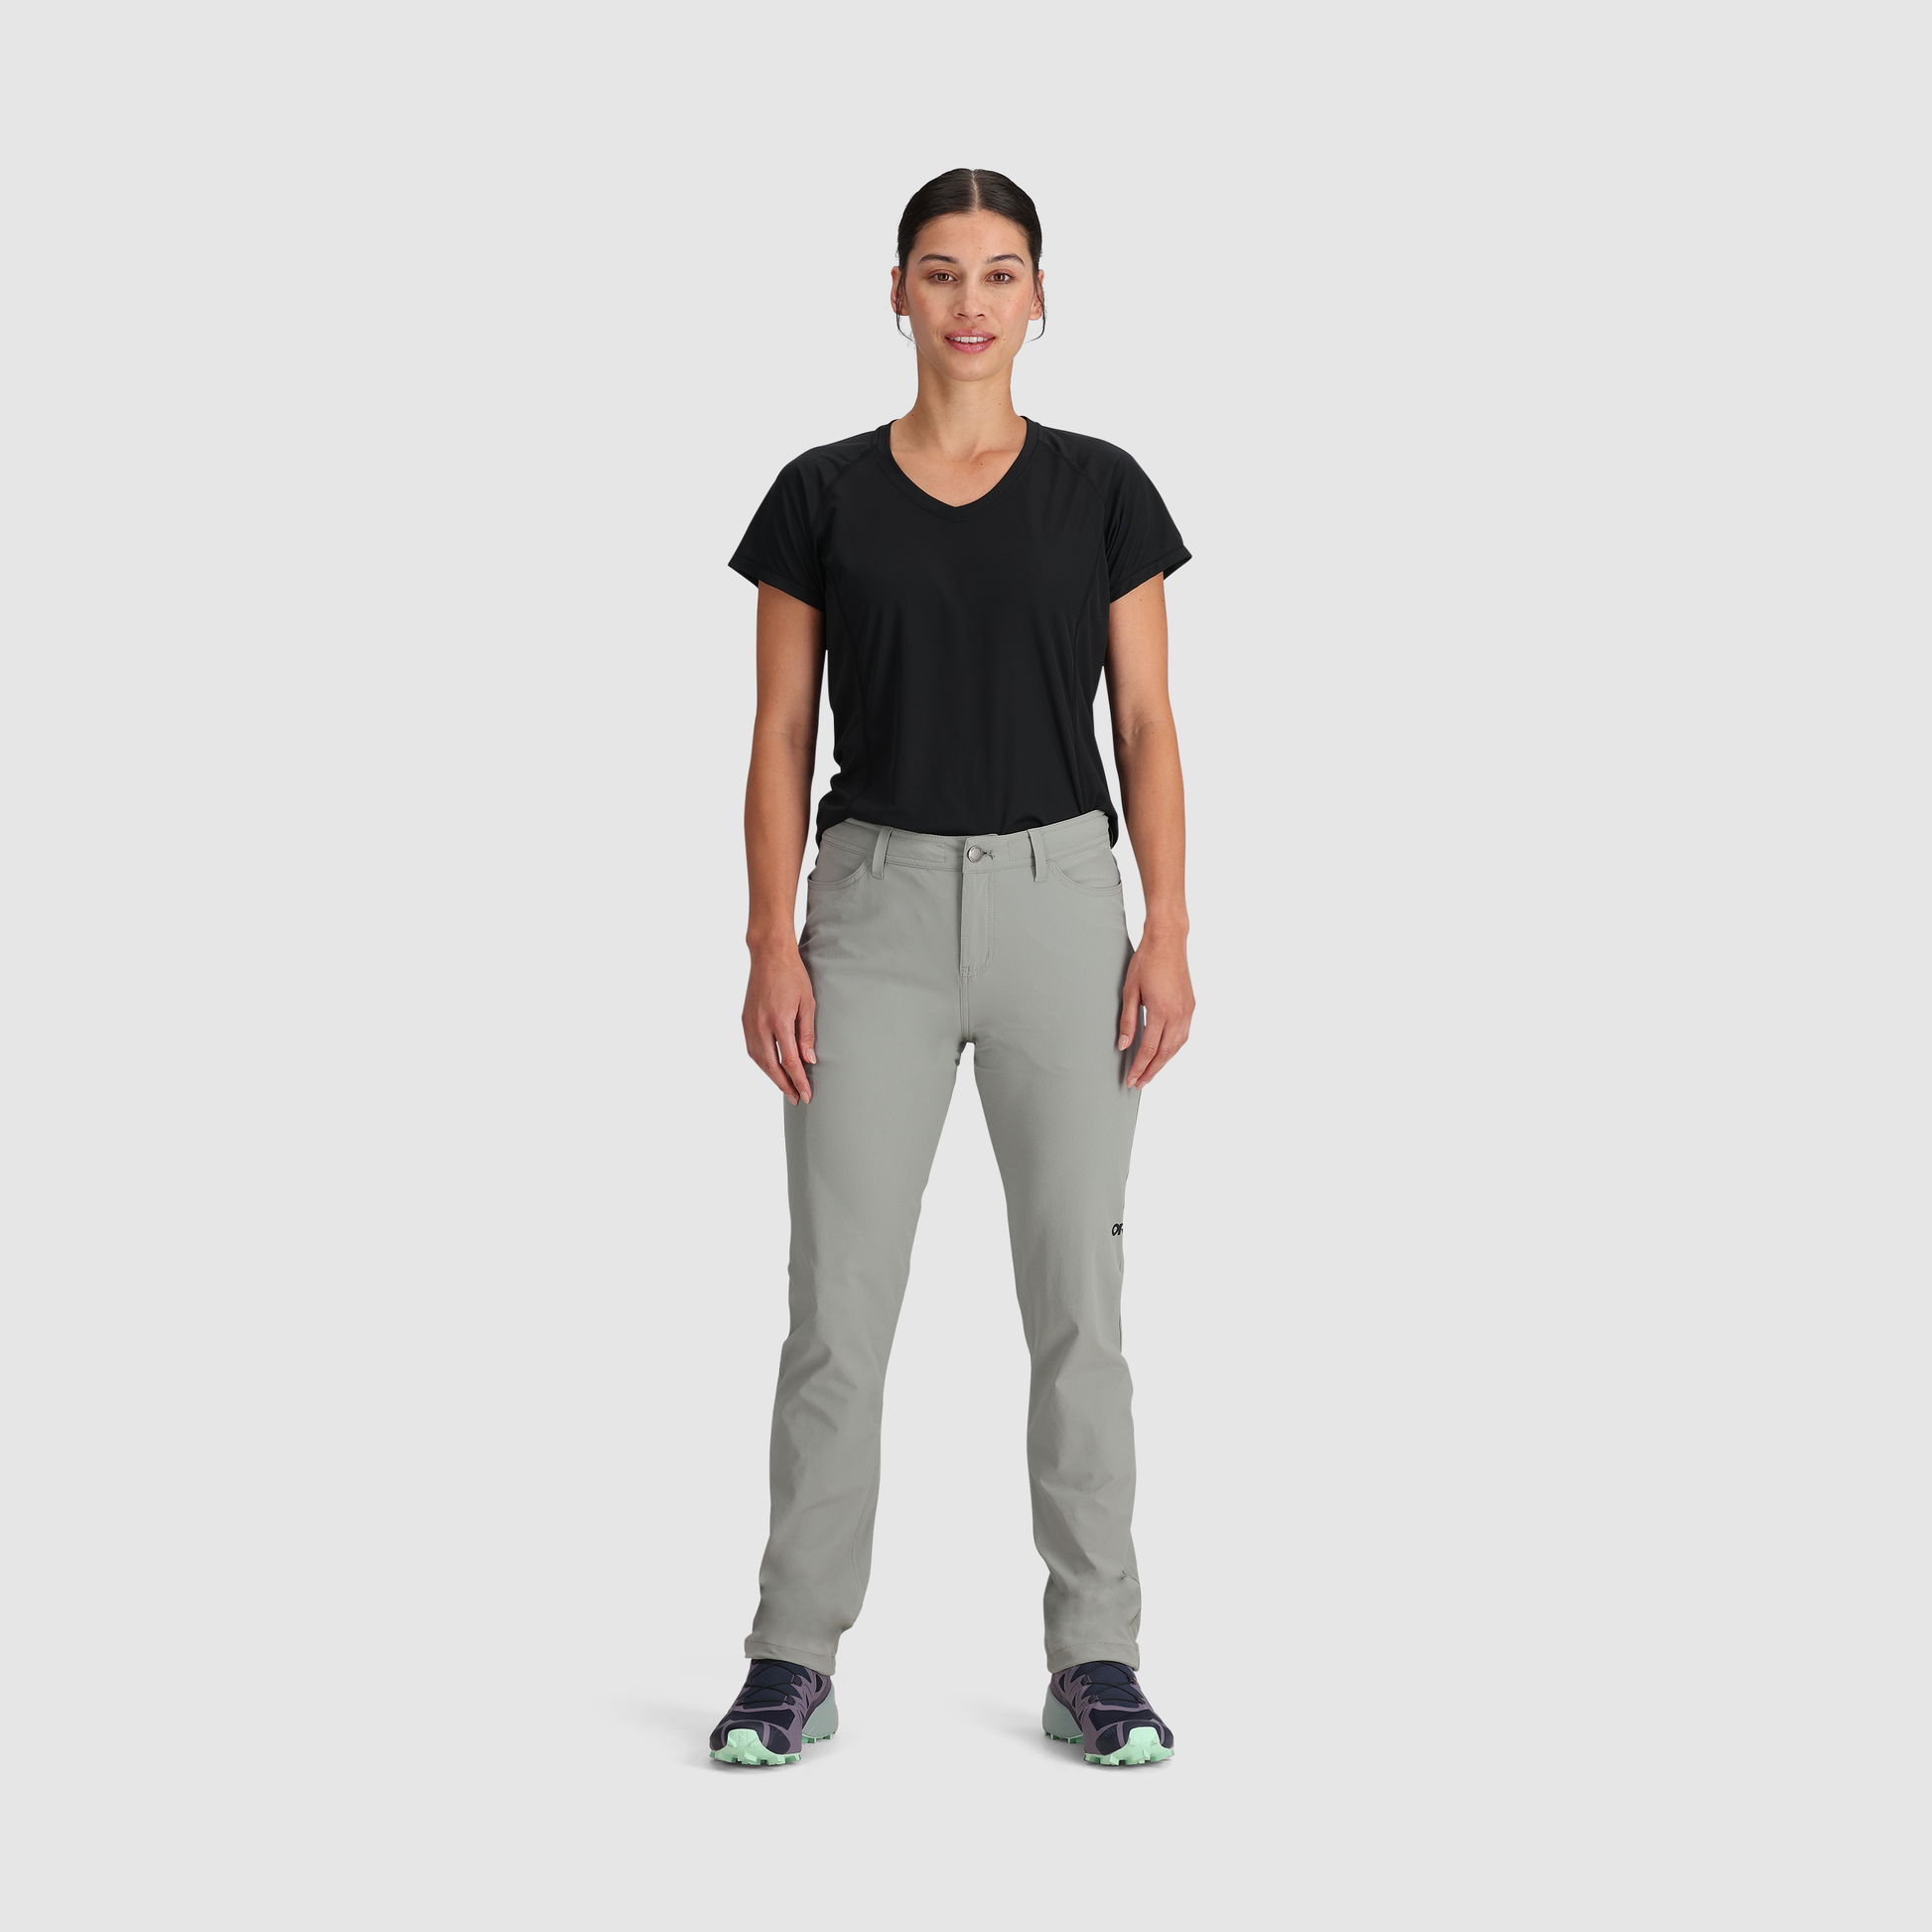 Outdoor Research Ferrosi Hybrid Leggings - Women's, — Womens Clothing Size:  Large, Gender: Female, Age Group: Adults, Apparel Application: Outdoor —  3002642596008 - 1 out of 5 models